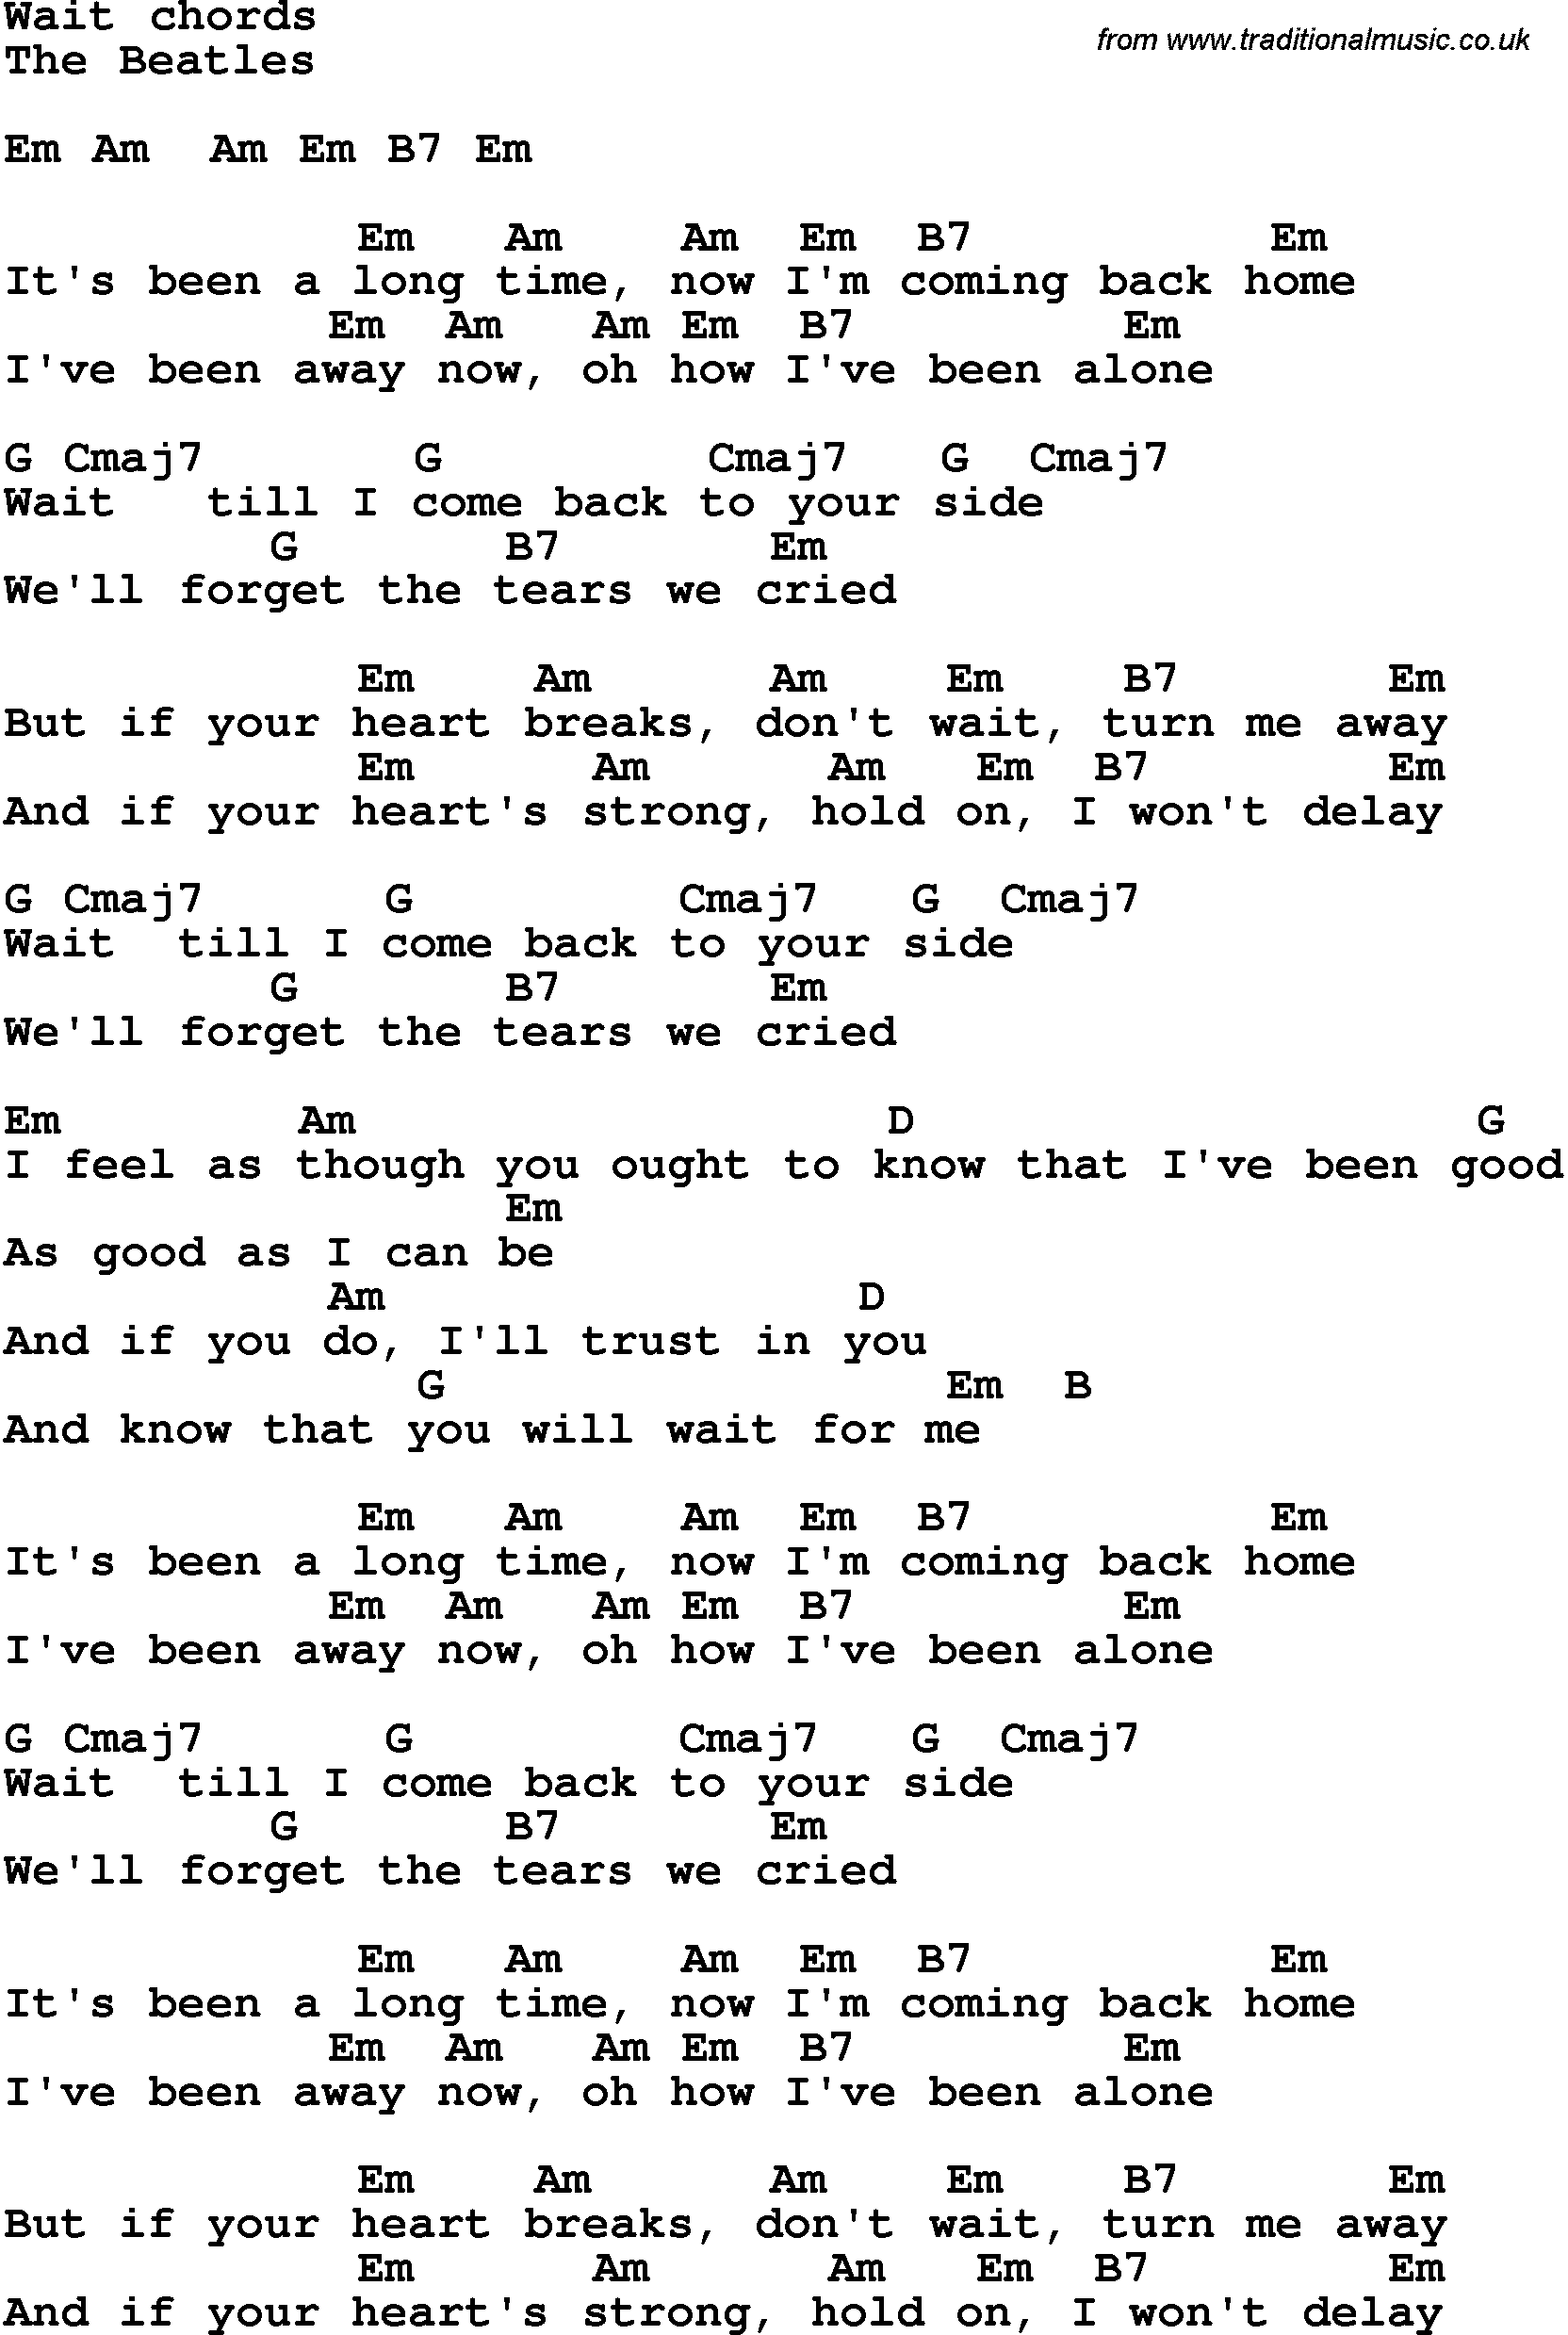 Song Lyrics with guitar chords for Wait